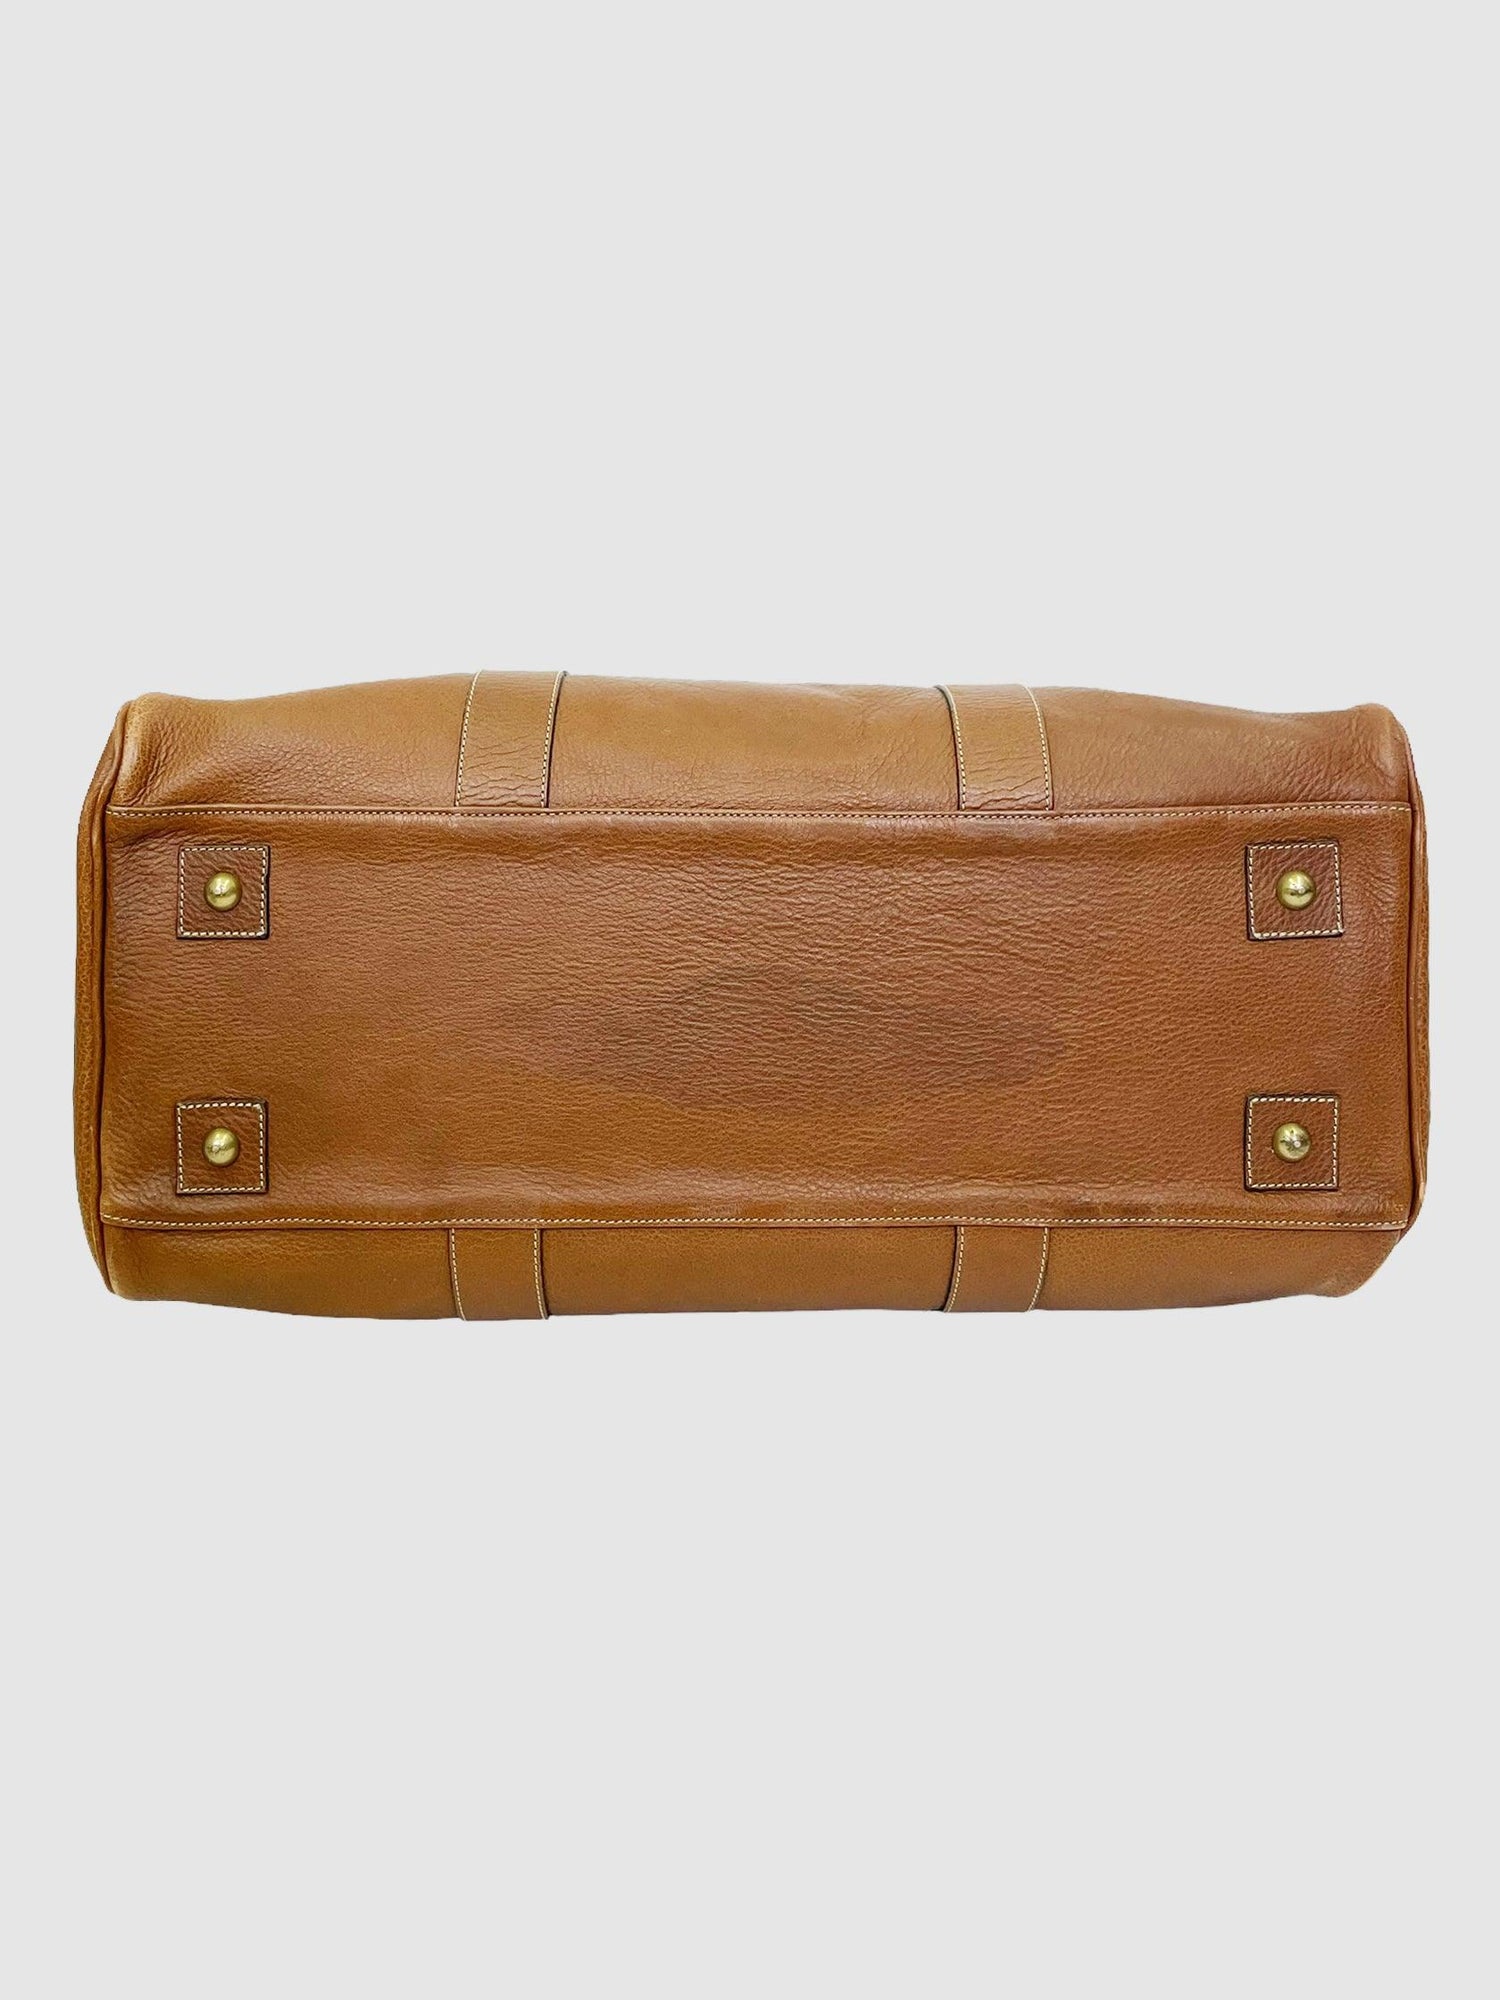 Mulberry Brow Leather Travel Bag - Second Nature Boutique